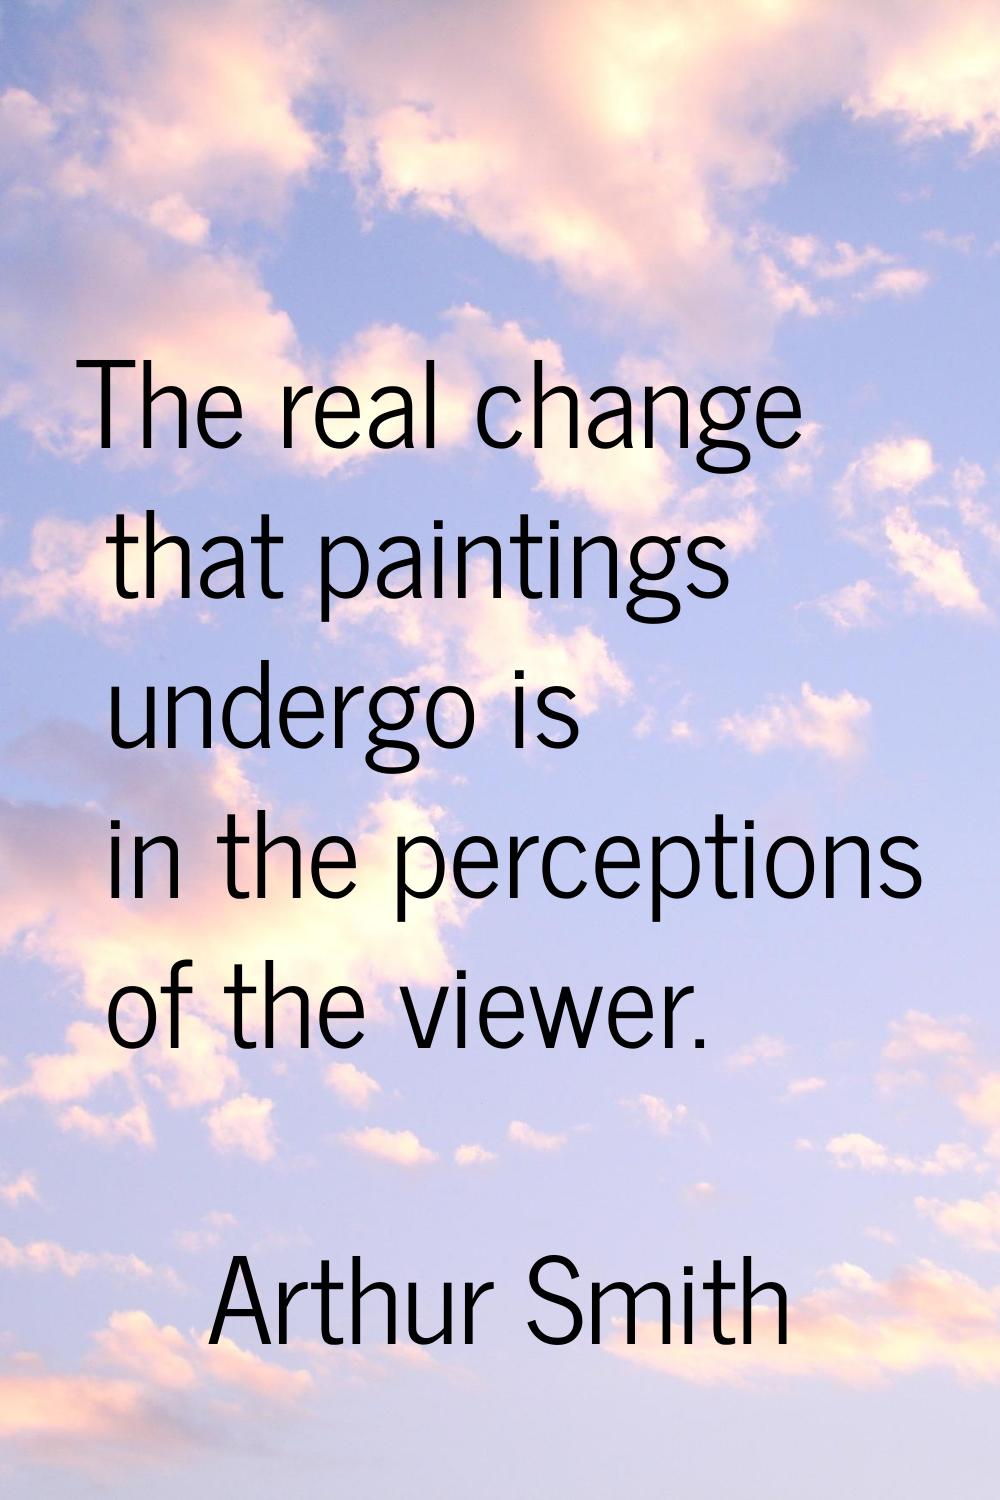 The real change that paintings undergo is in the perceptions of the viewer.